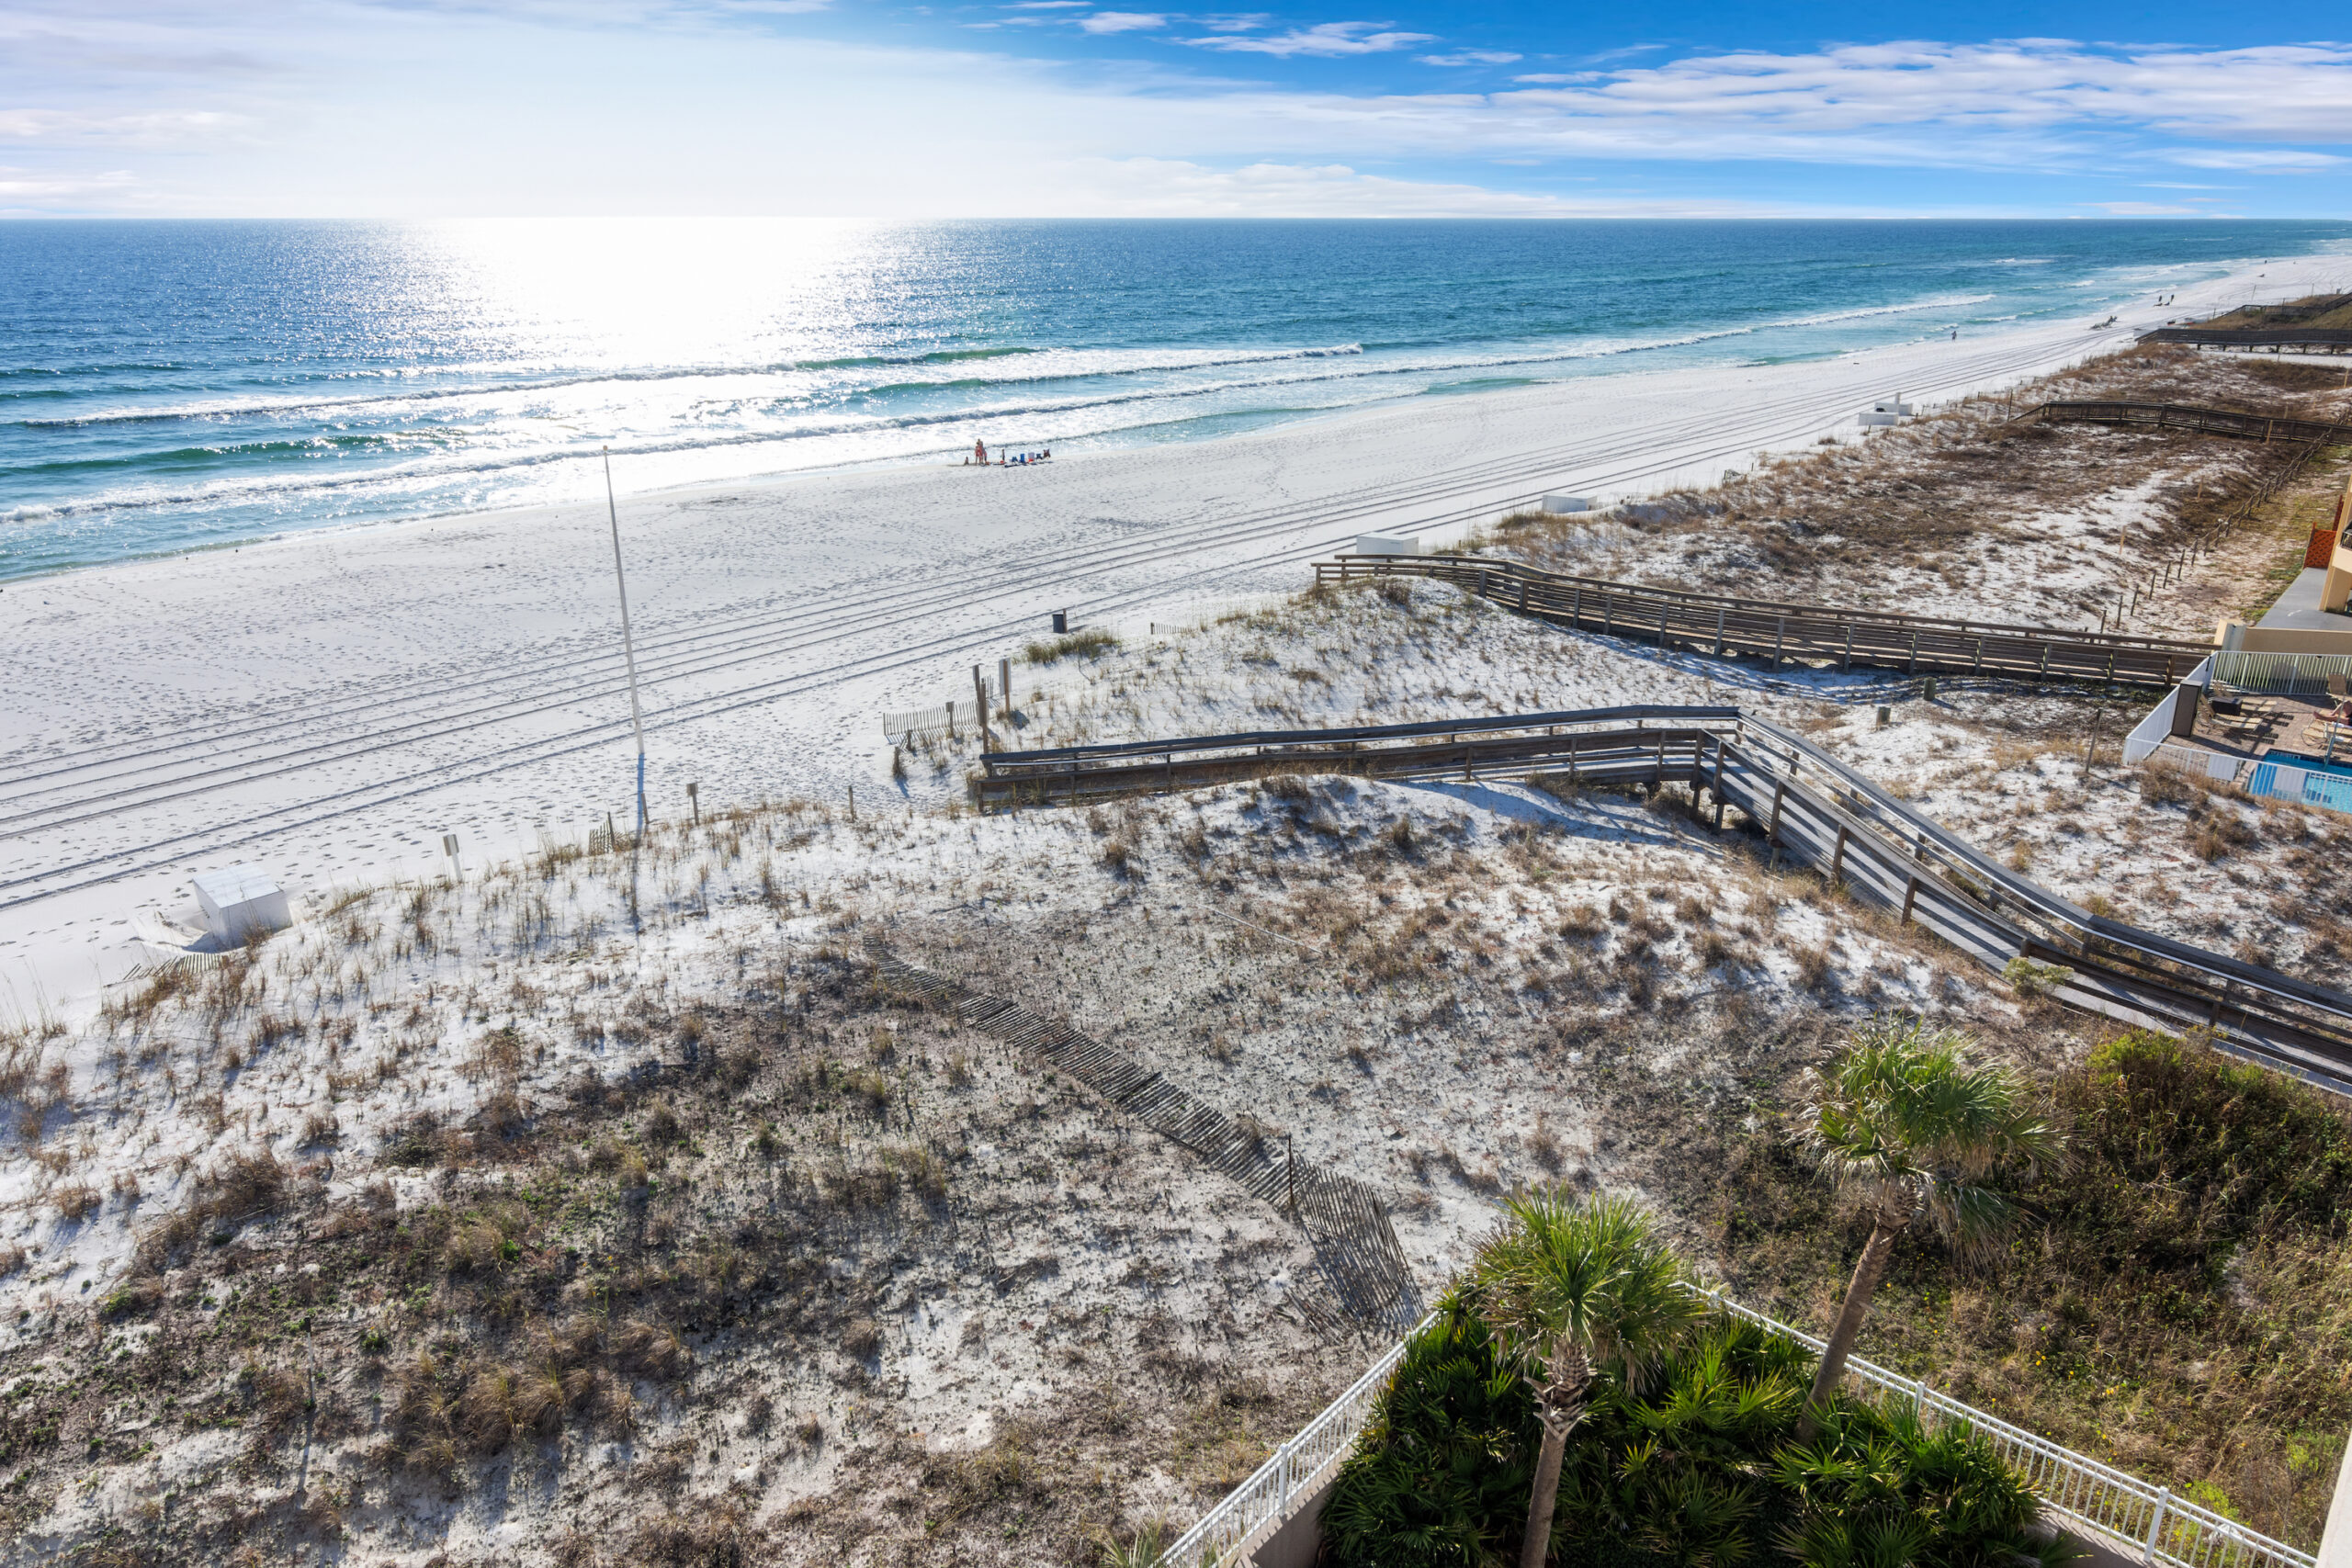 View of sand dunes along Okaloosa Island from our beach vacation rental condo